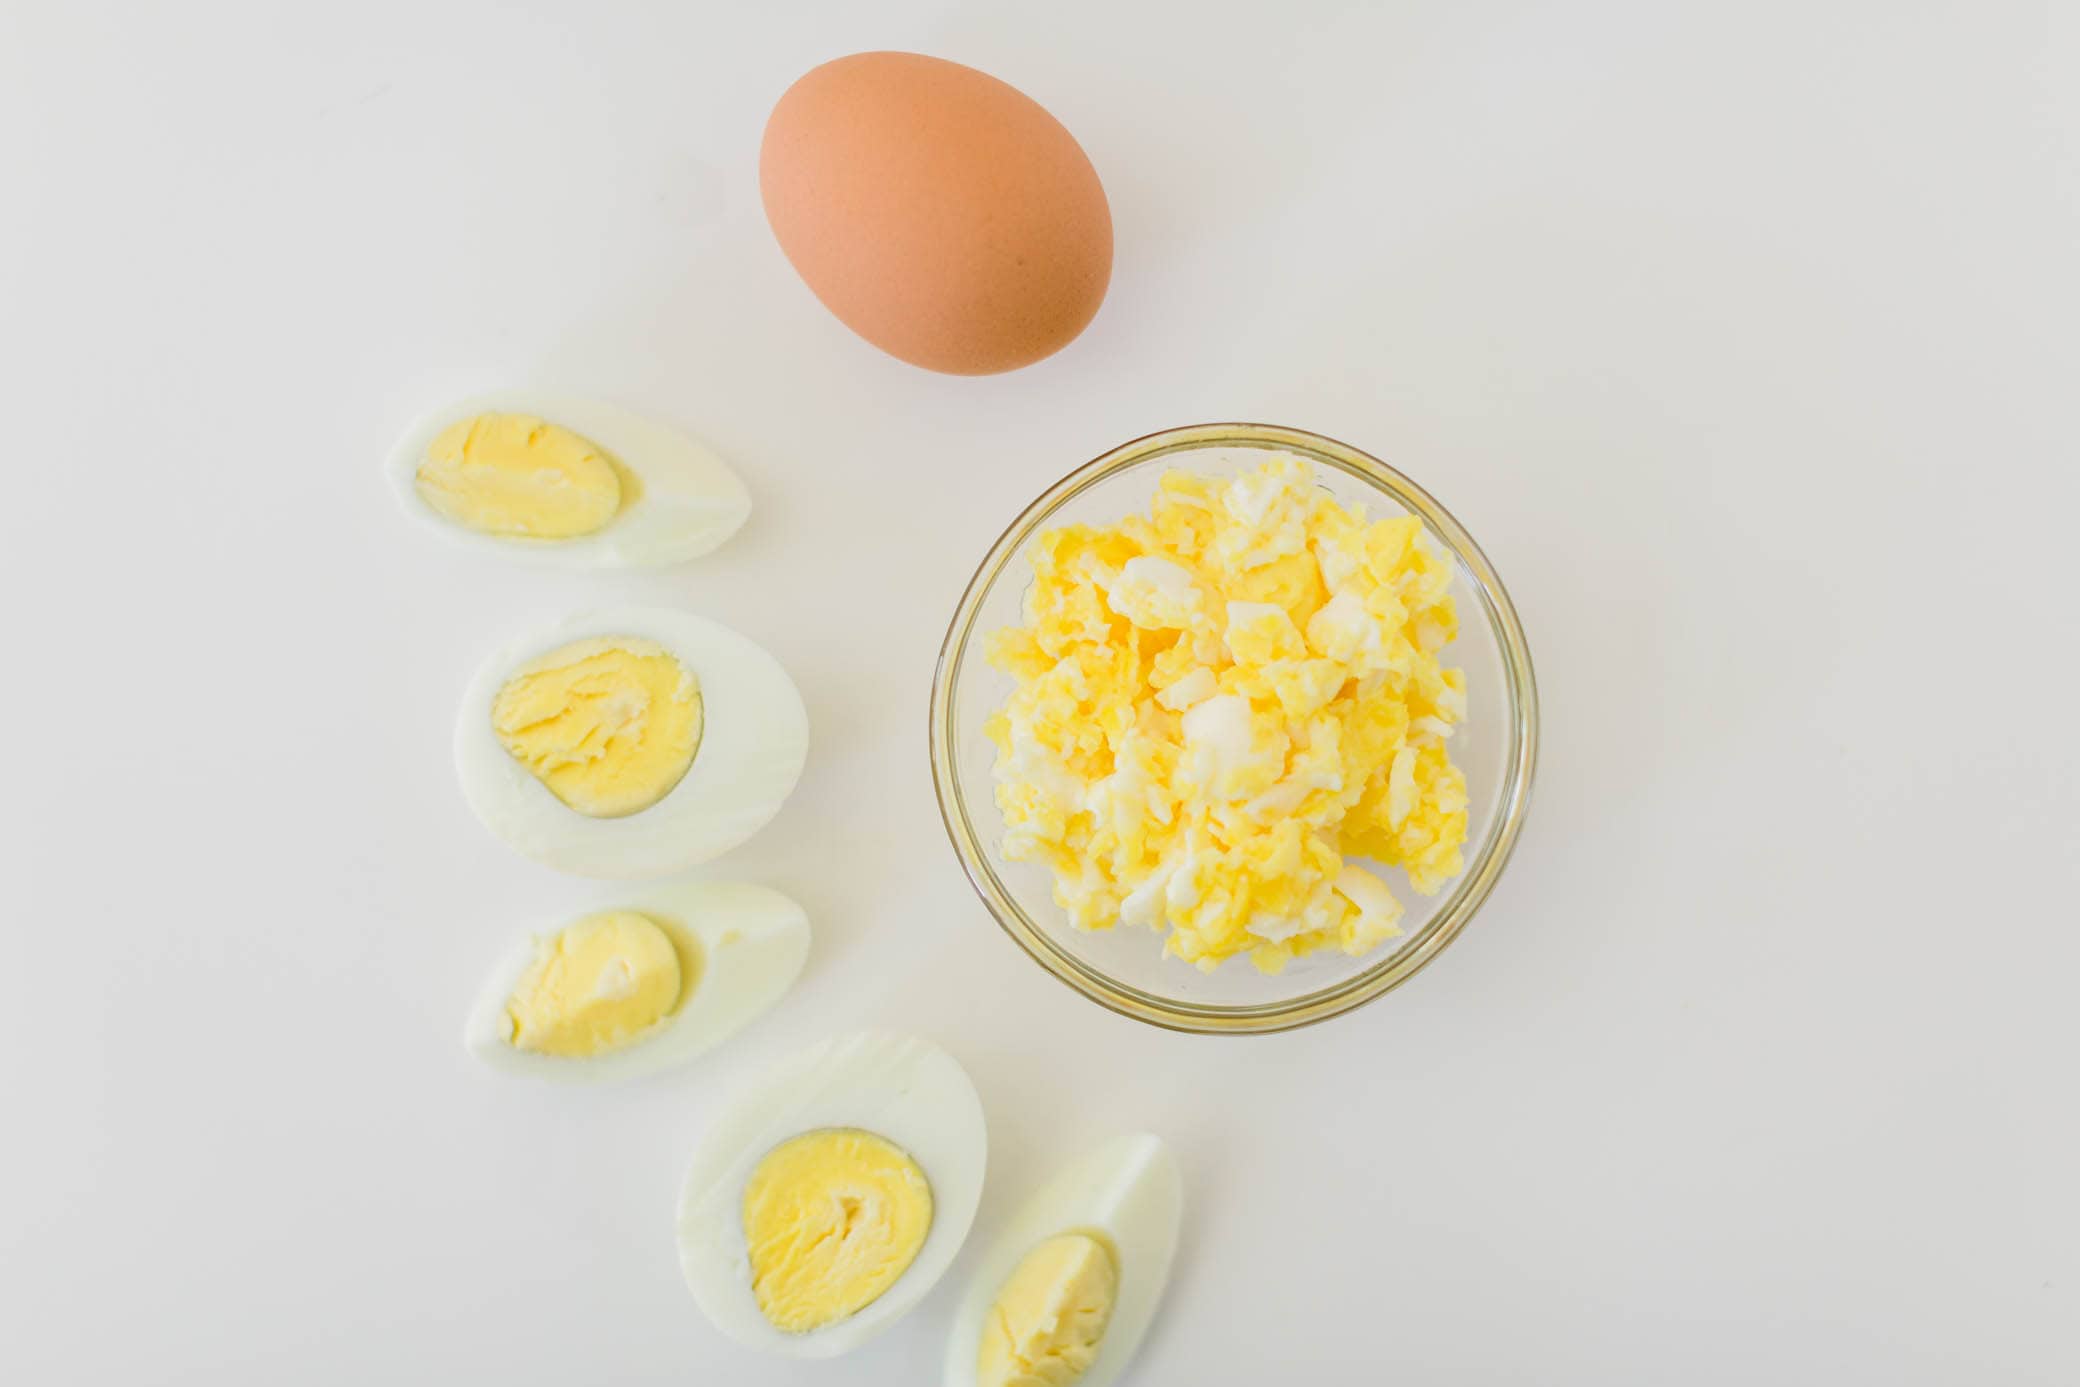 Eggs shown different ways to prepare to give to a baby.